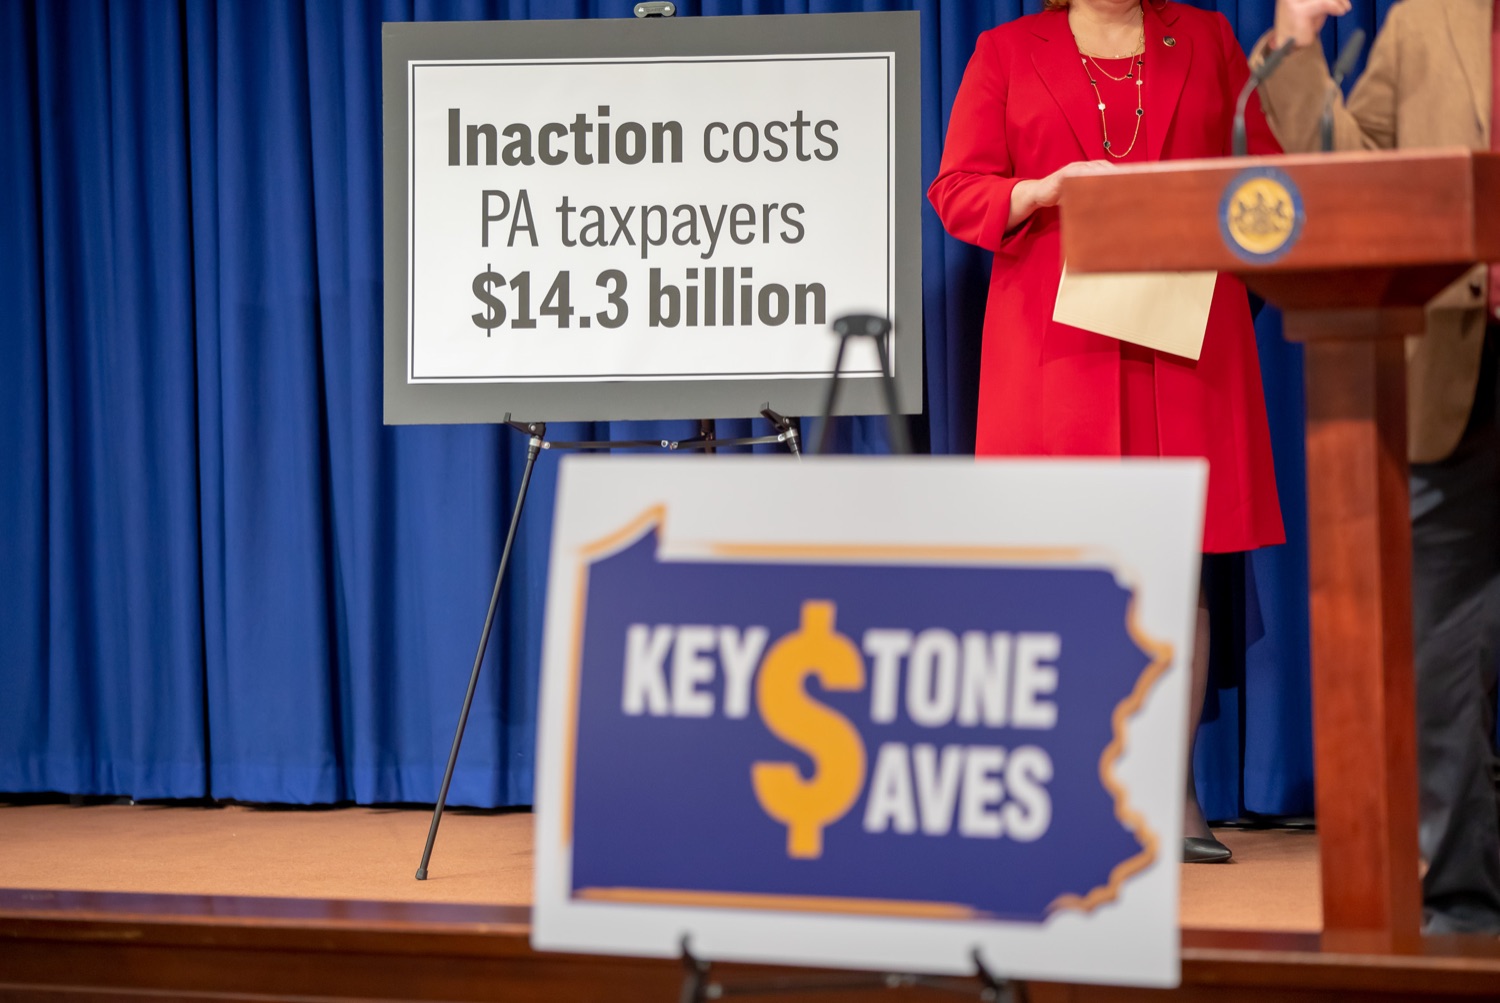 Treasurer Stacy Garrity, Rep. Tracy Pennycuick and Rep. Michael Driscoll announced the upcoming introduction of a bill to create Keystone Saves, a retirement savings program for hardworking Pennsylvanians who do not have access to retirement savings through their employer.  They were joined at the announcement by supporters in the General Assembly and representatives of AARP, the United Way of Pennsylvania, the Pennsylvania Health Care Association, and the Pennsylvania Association of Sustainable Agriculture. Other supporters of Keystone Saves include The Pew Charitable Trusts and the Pennsylvania Institute of CPAs. Harrisburg, PA - December 12, 2021<br><a href="https://filesource.amperwave.net/commonwealthofpa/photo/20293_TREAS_KeystoneSaves_AG_13.jpg" target="_blank">⇣ Download Photo</a>